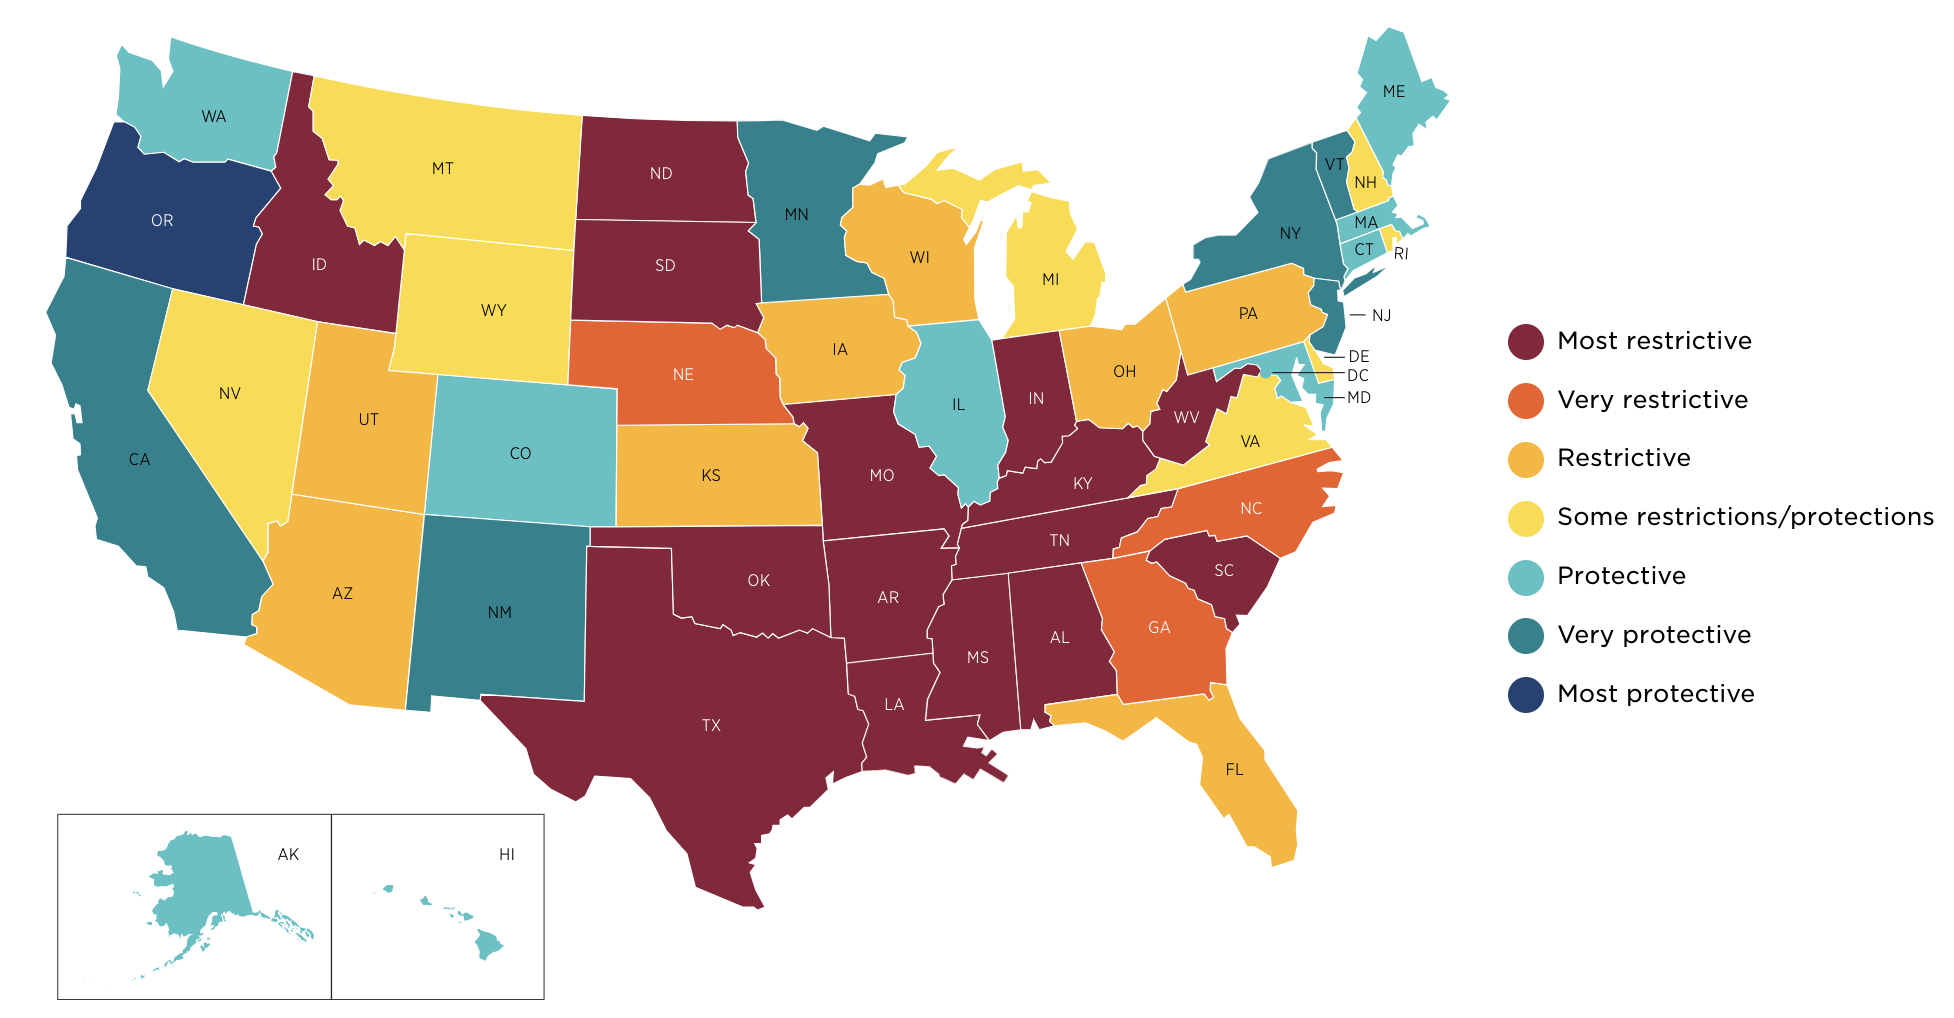 a map of the United States shaded in colors from burgundy to navy denoting where state abortion policies rank from most restrictive to most protective